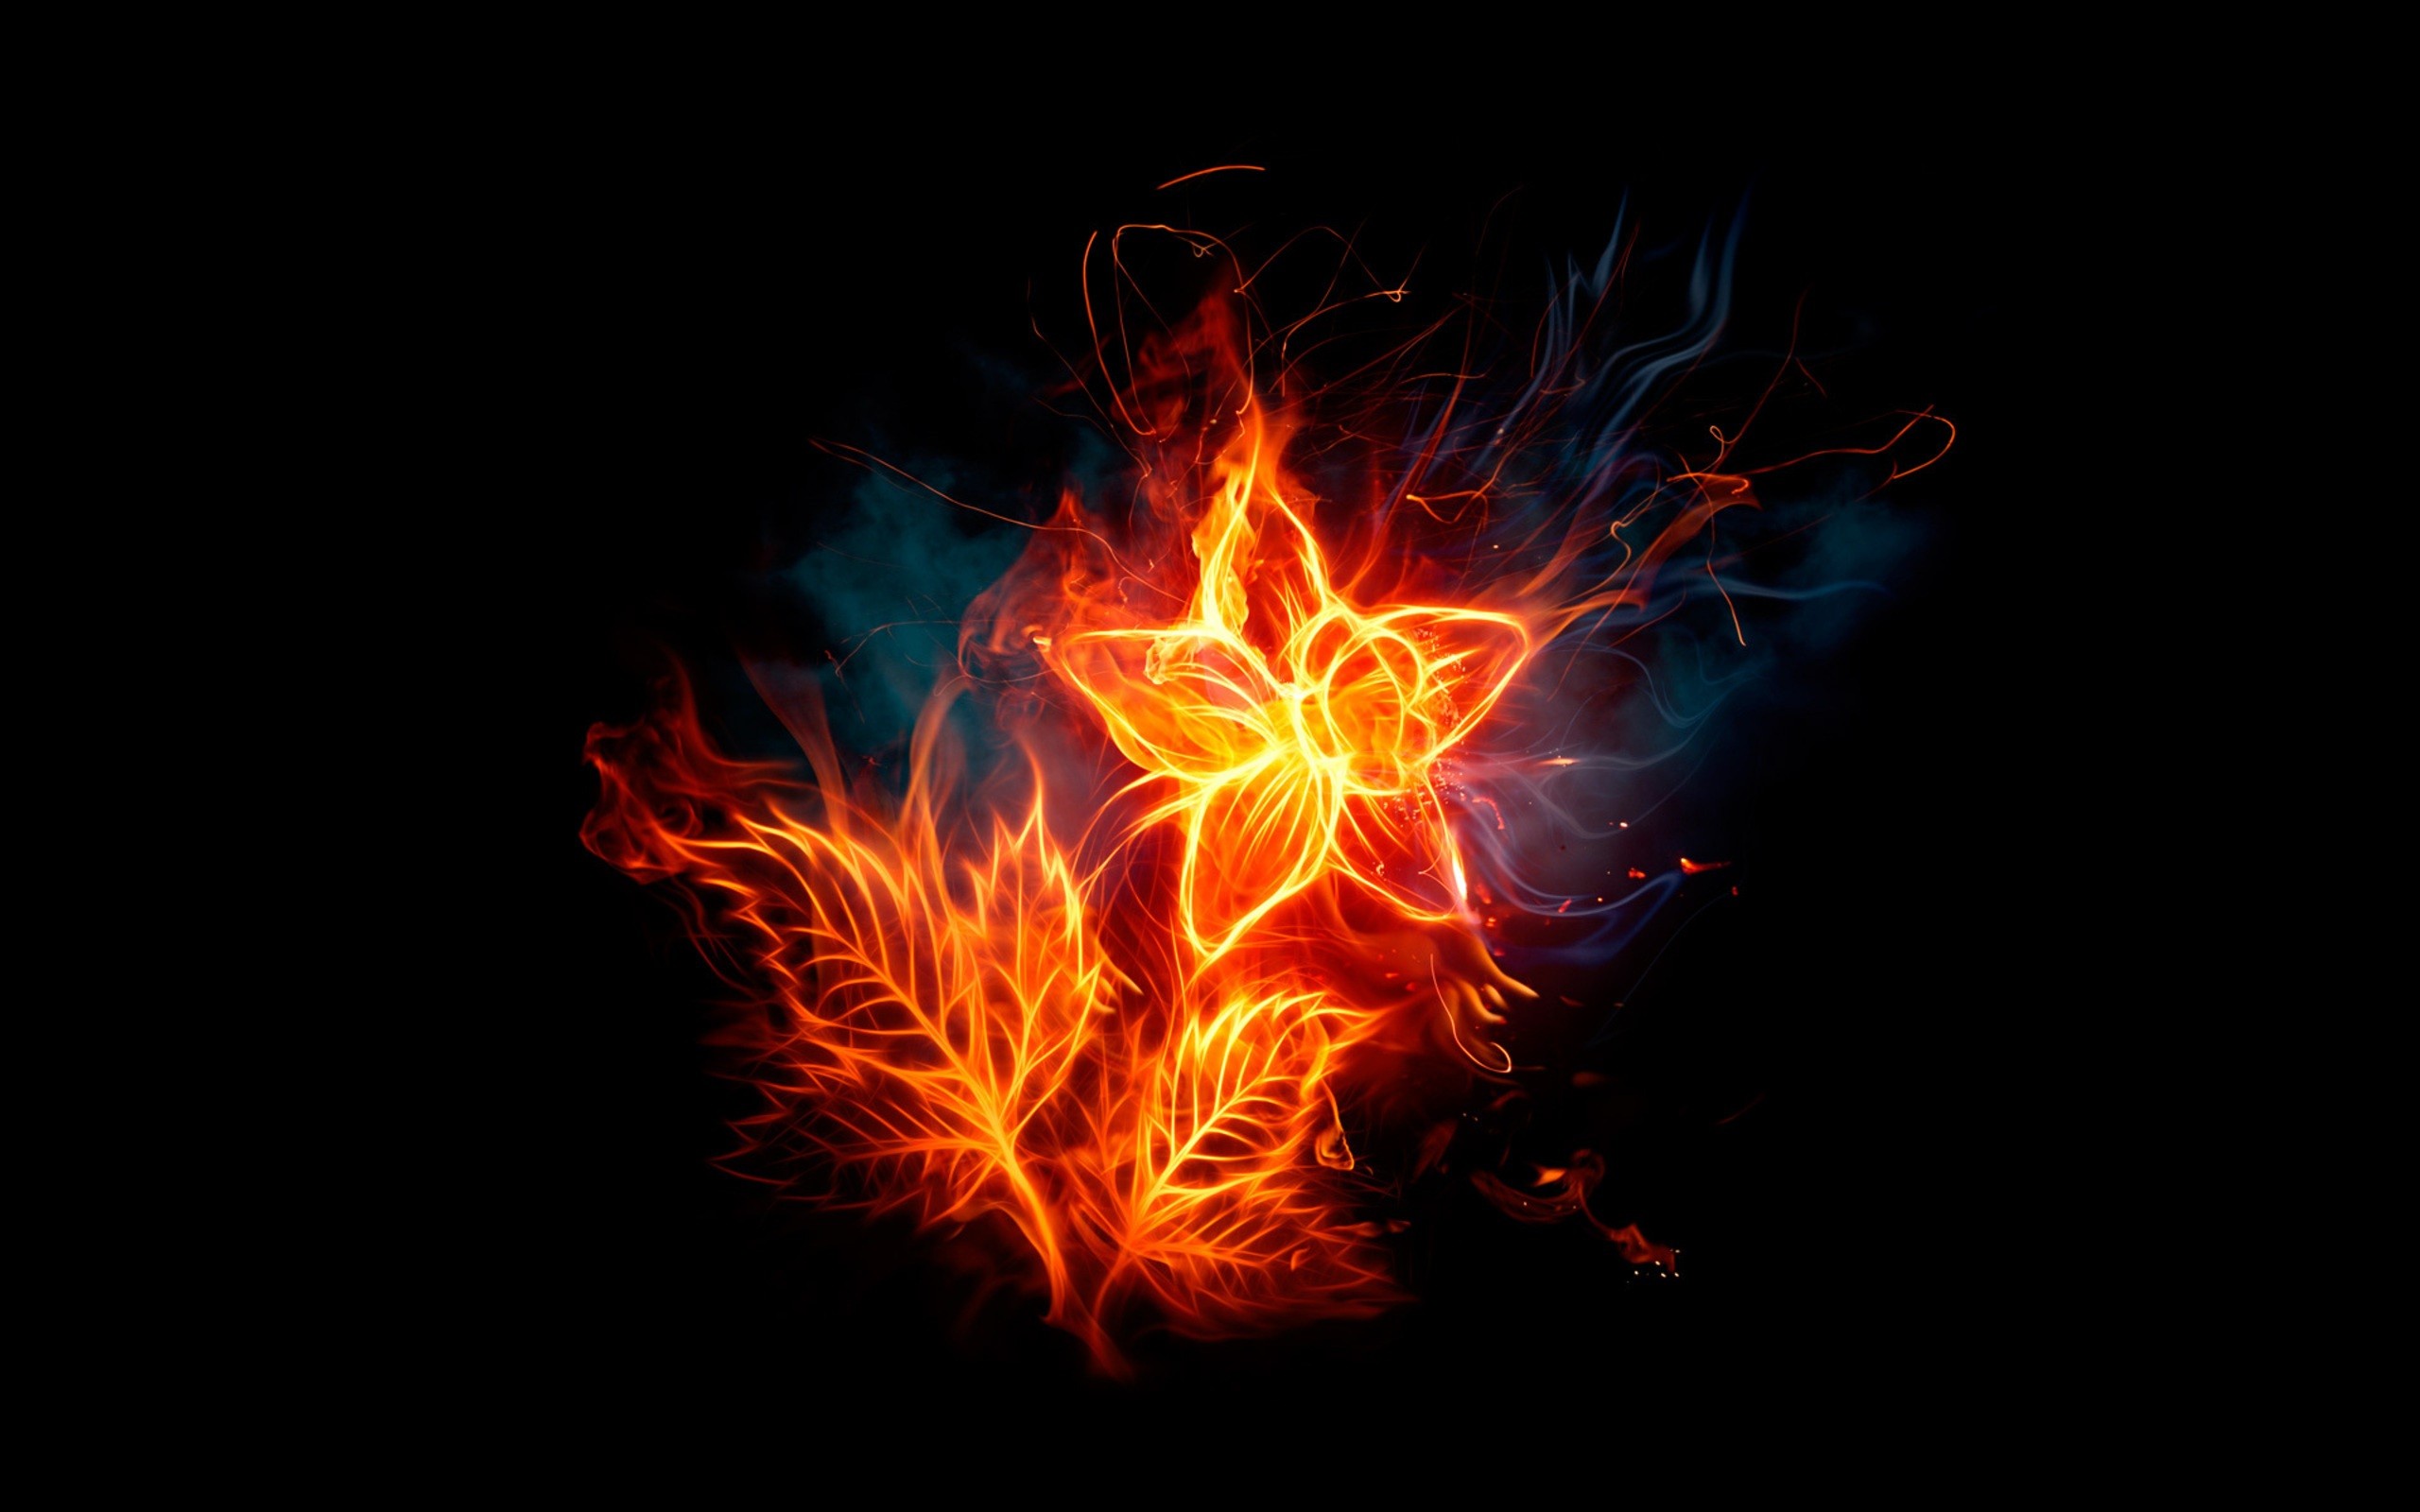 Abstract Fire Glowing Dark Wallpaper And Stock Photos